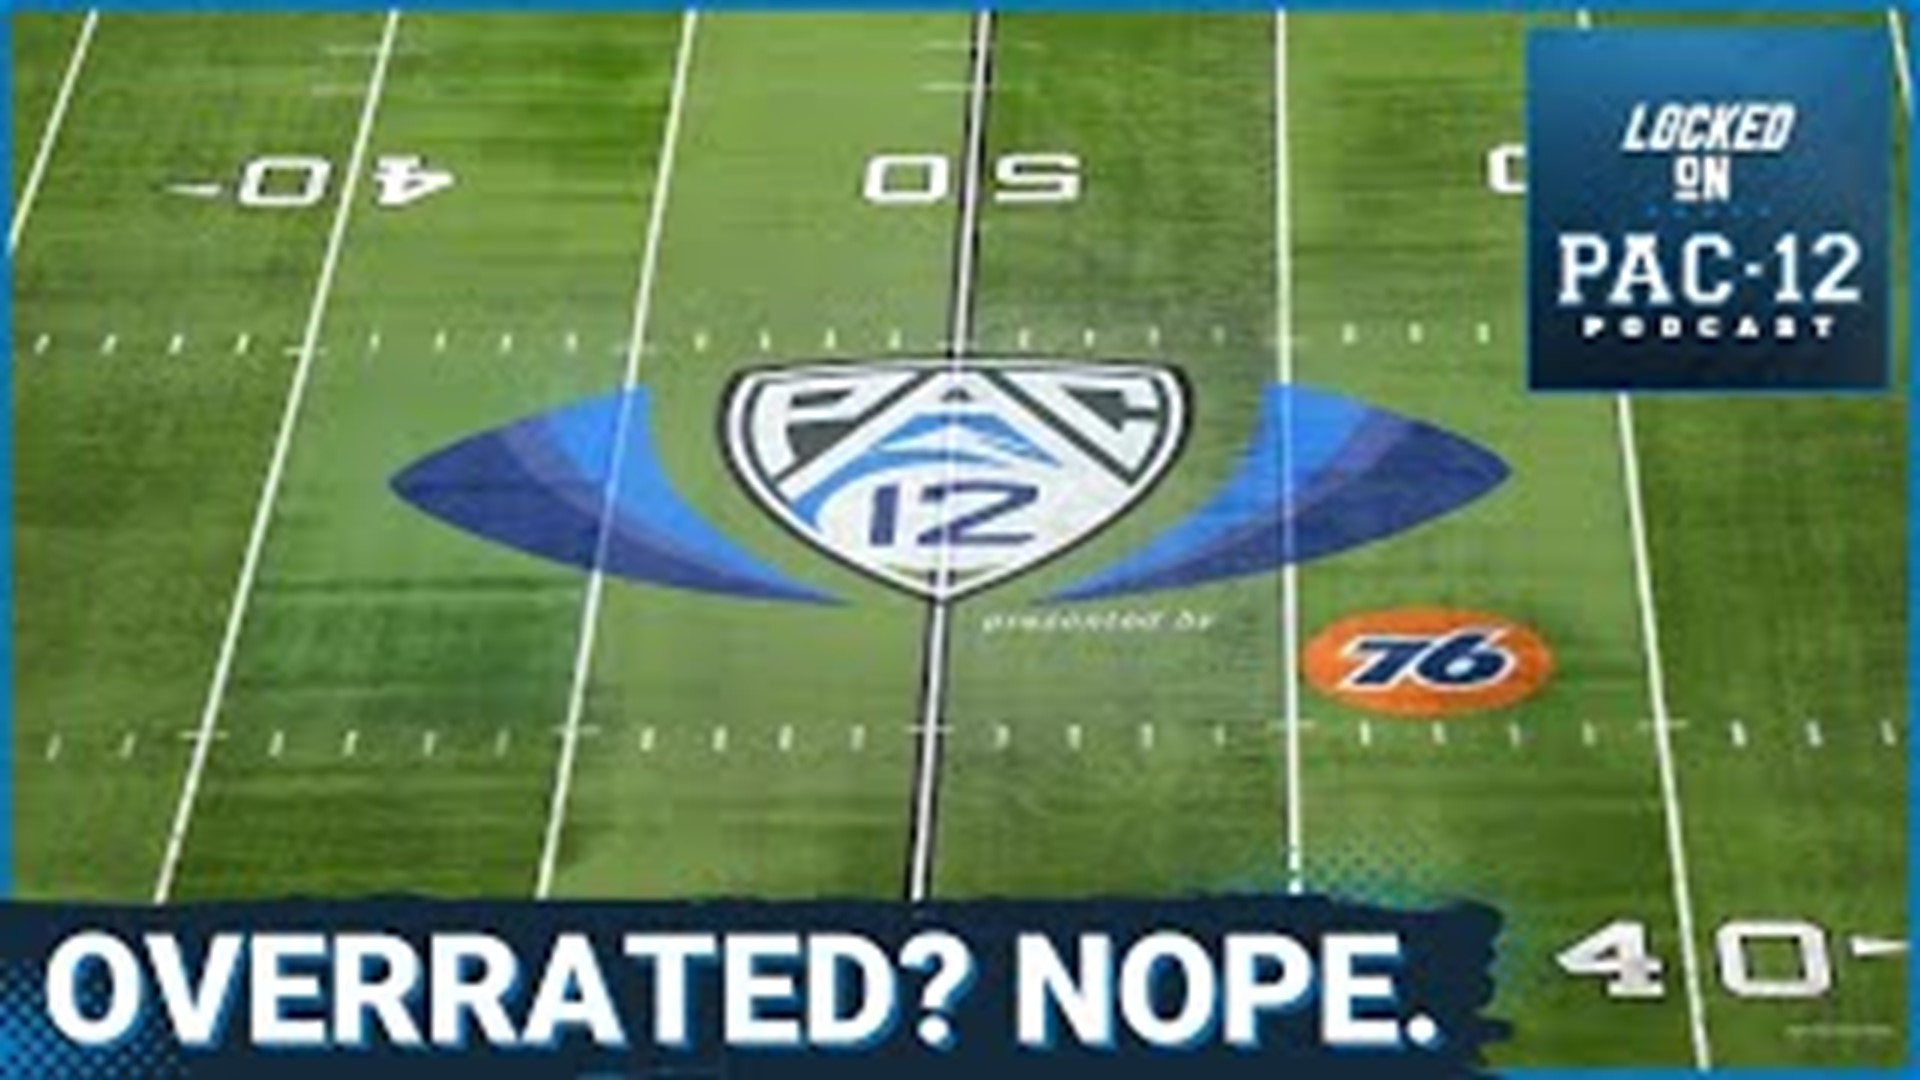 Following non-conference play, the Pac-12 had 8 teams ranked inside the top 25. By the end of the year that number had been cut in half. Was the league overrated?